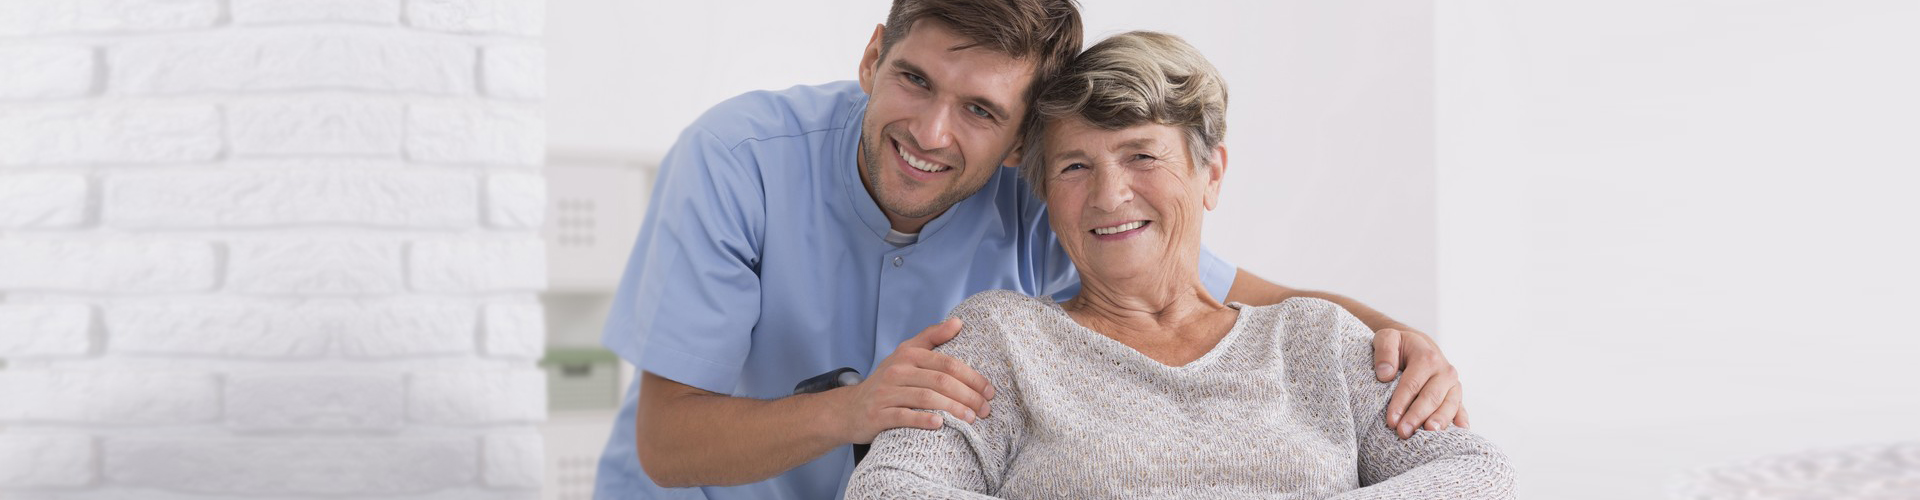 Caregiver smiling together with elderly woman